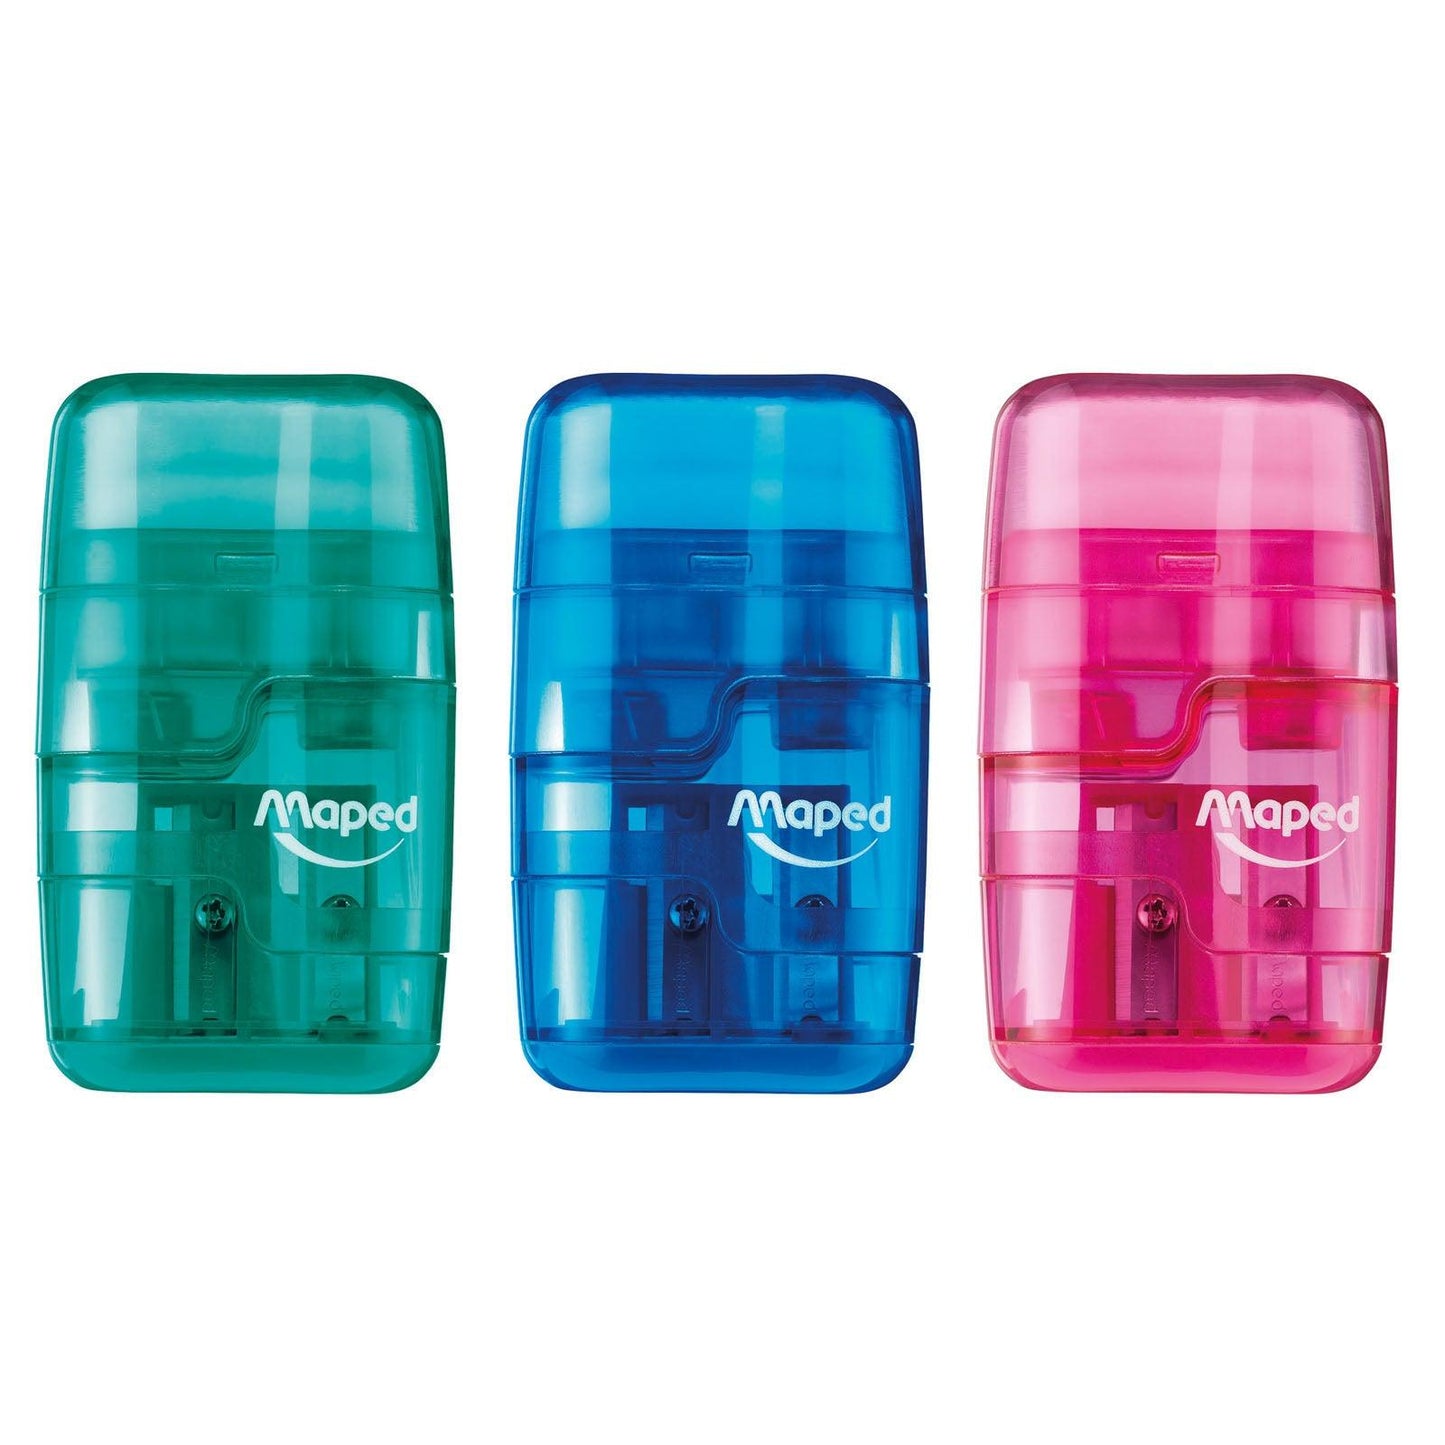 Connect DUO 2 Hole Sharpener / Eraser Combo, Assorted Colors, Pack of 12 - Loomini